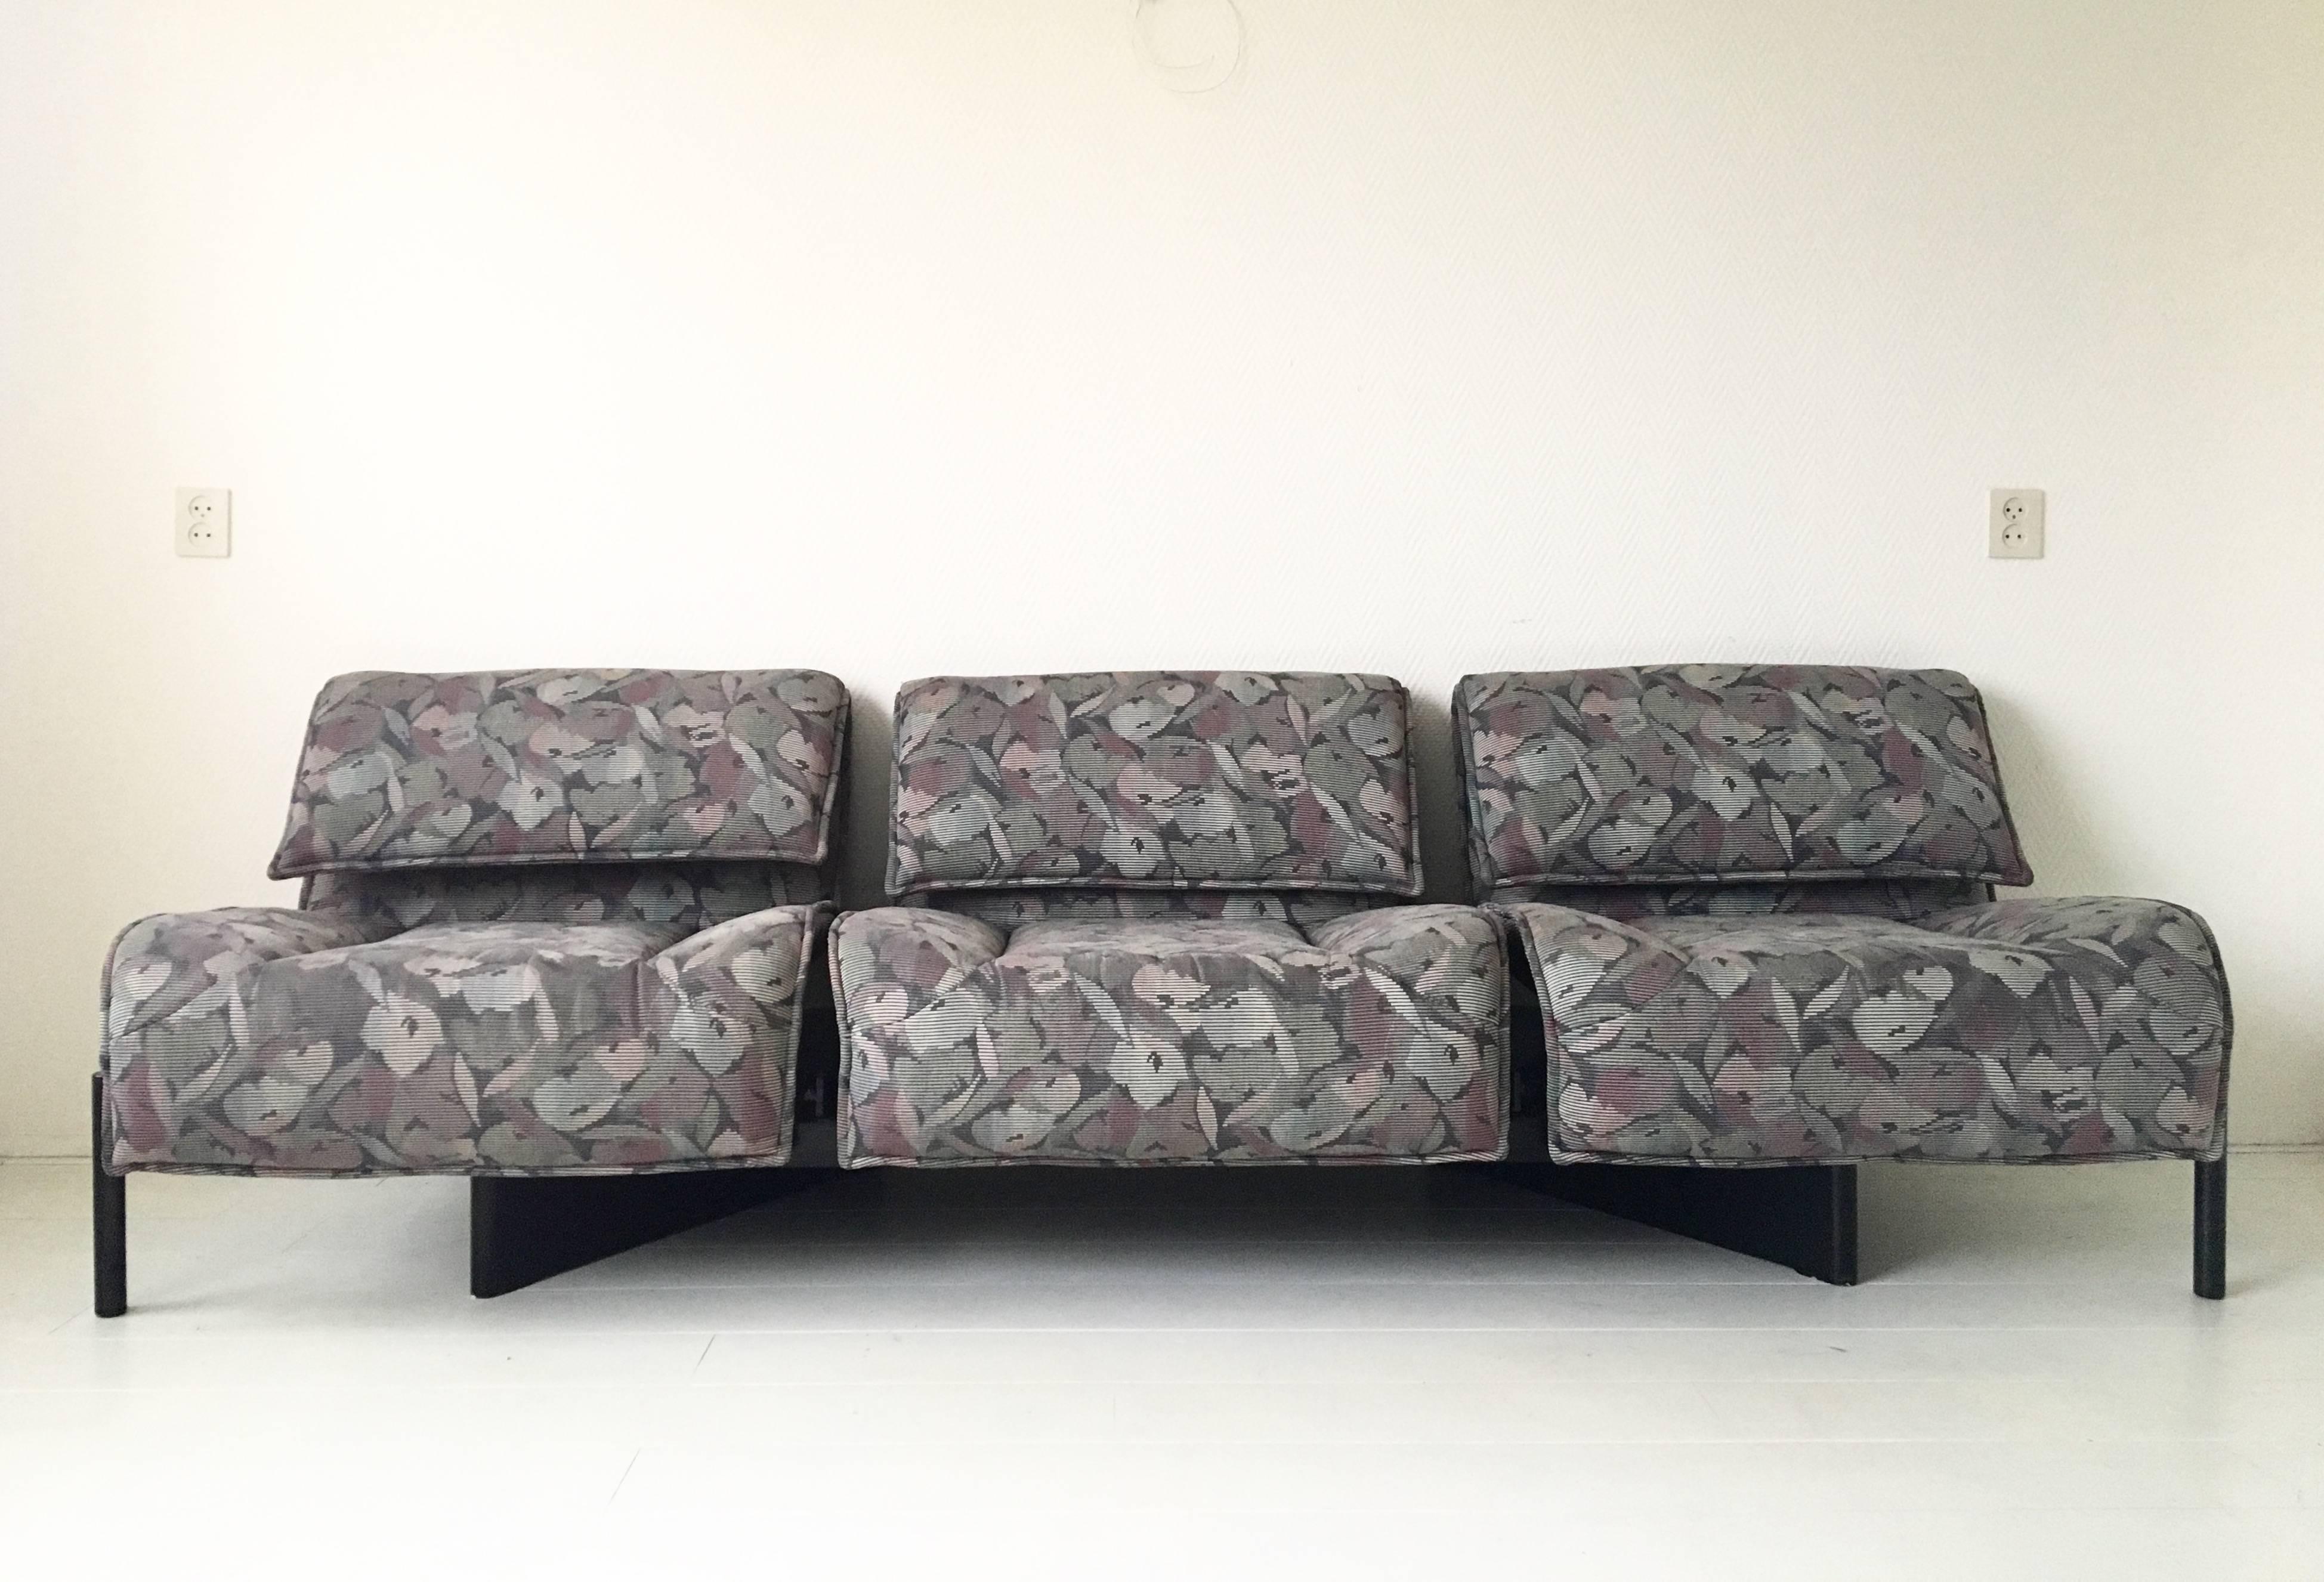 This multicolored and adjustable sofa was designed by Vico Magistretti for Cassina, circa 1980s. This smart and highly desirable Italian design features seats that are upholstered with fabric and that can be adjusted in place and the backrests in